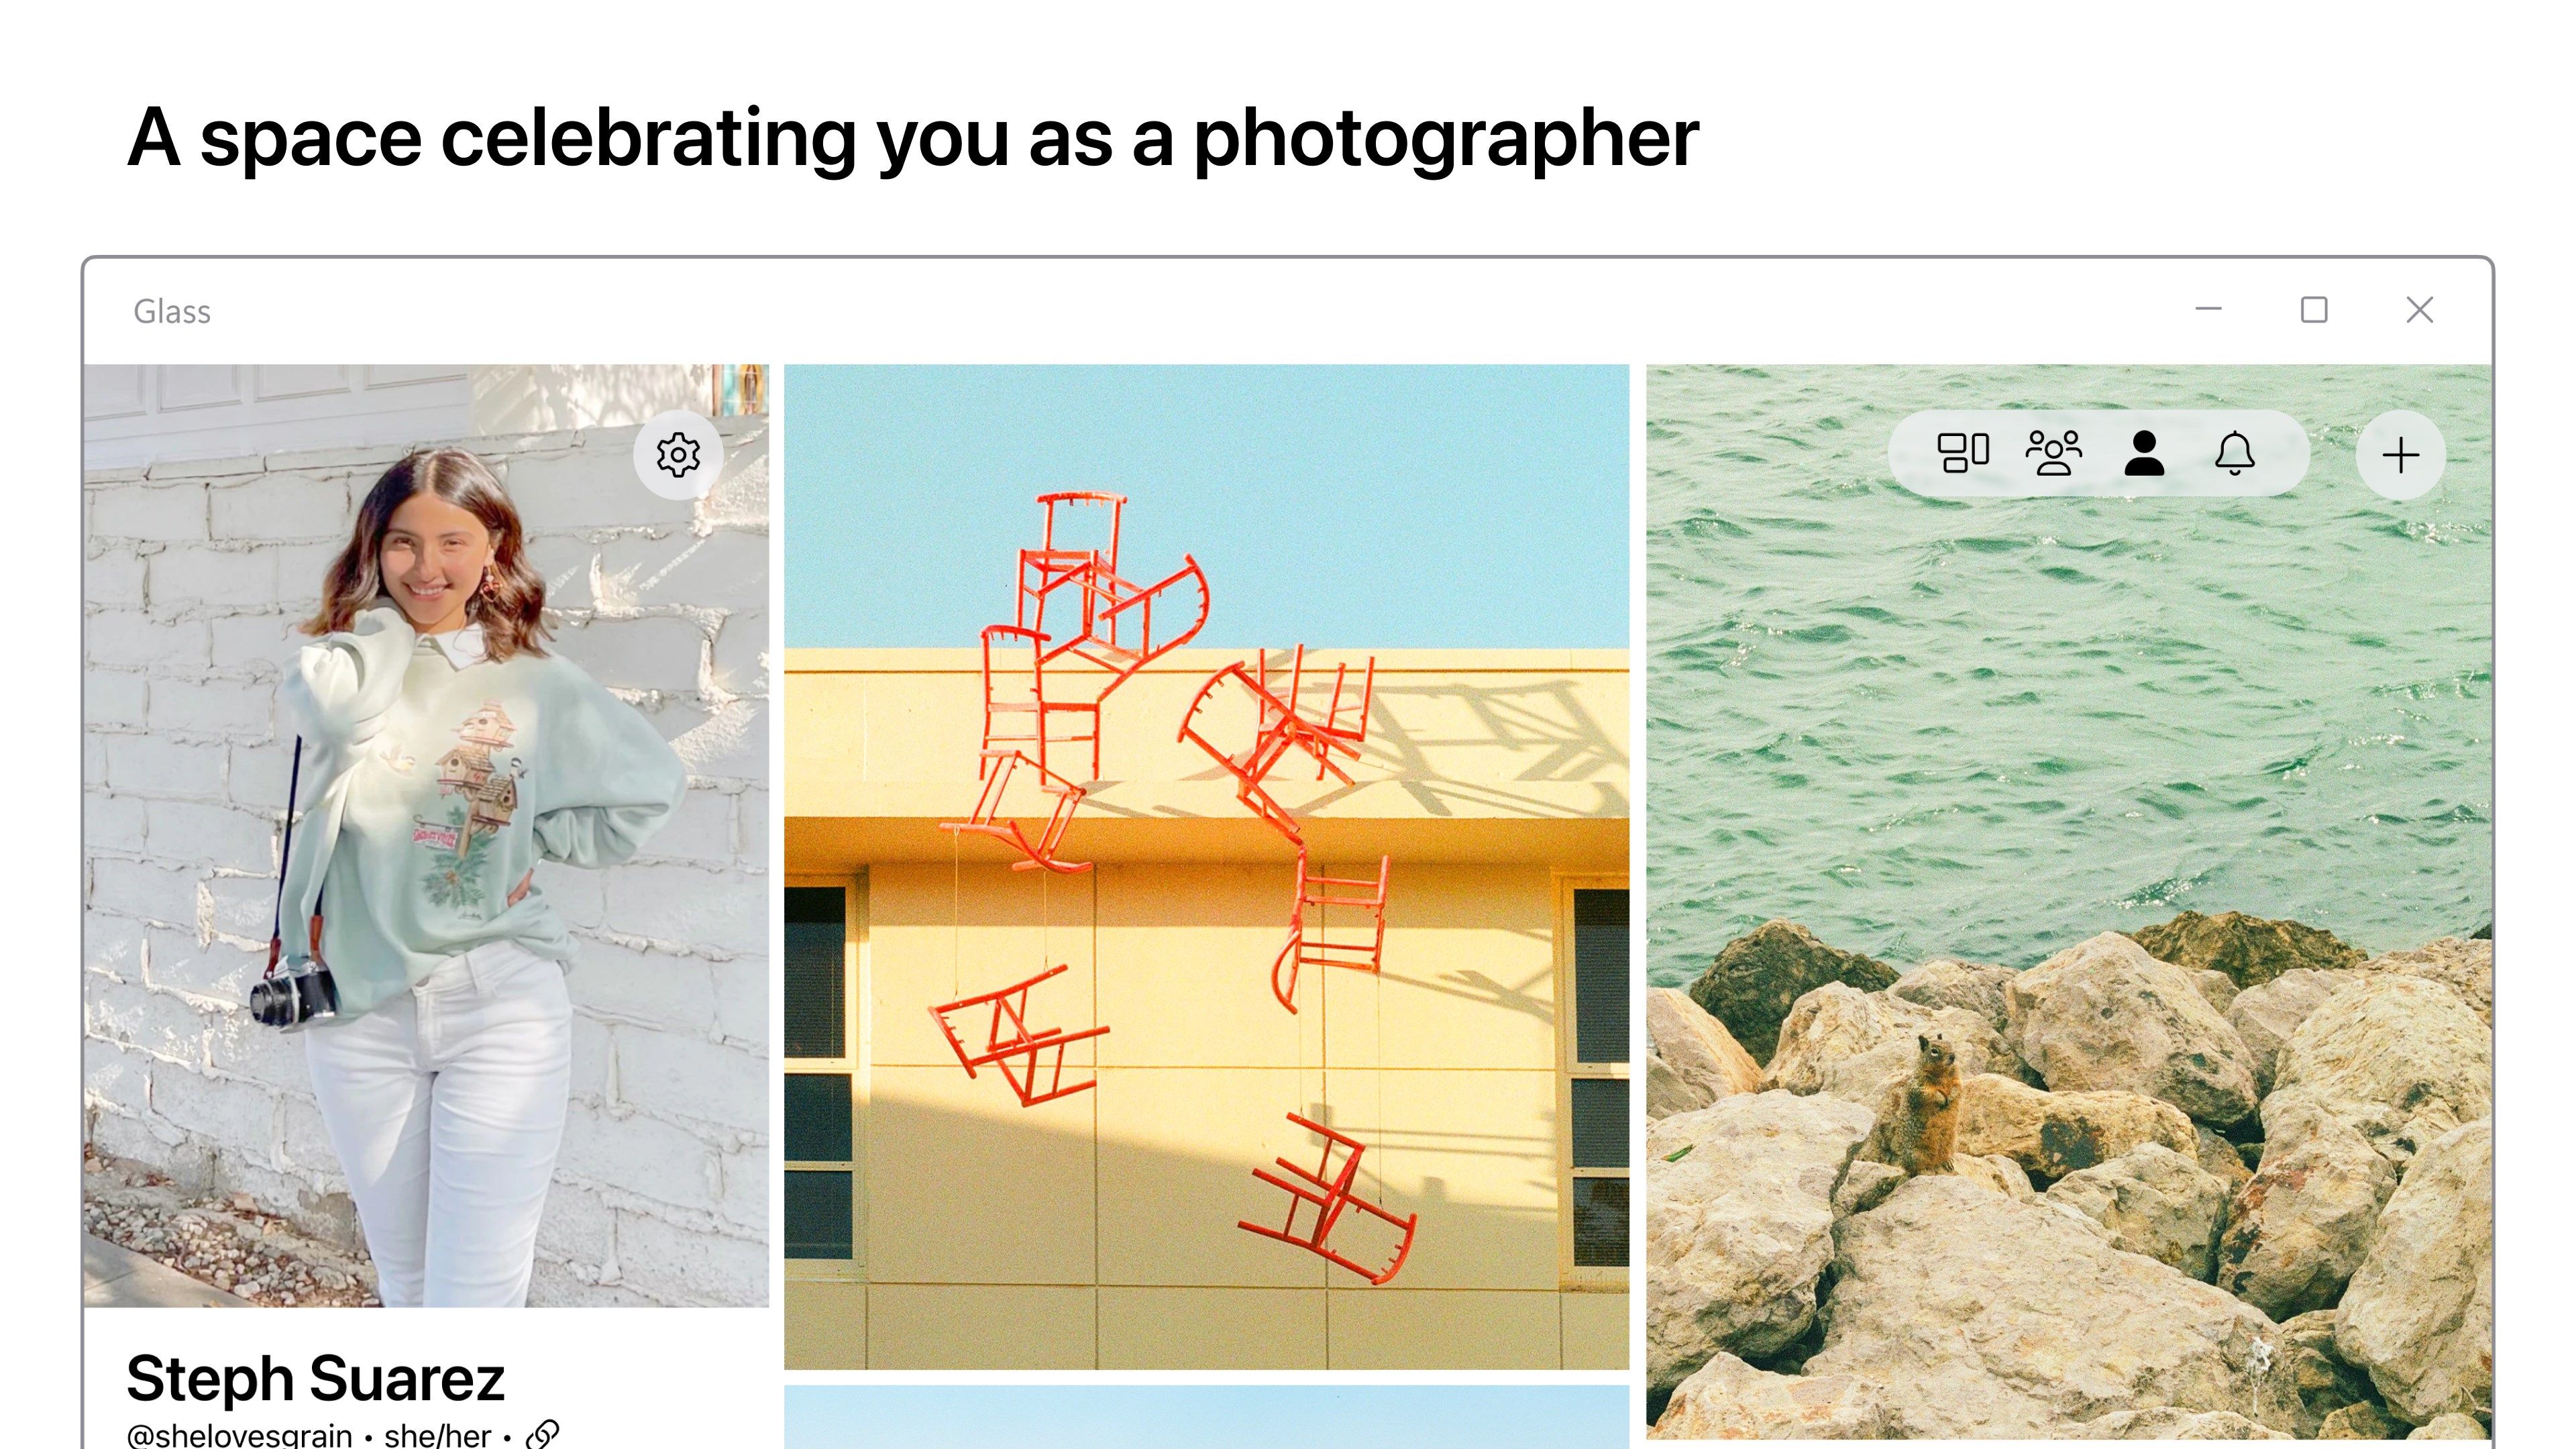 A space celebrating you as a photographer